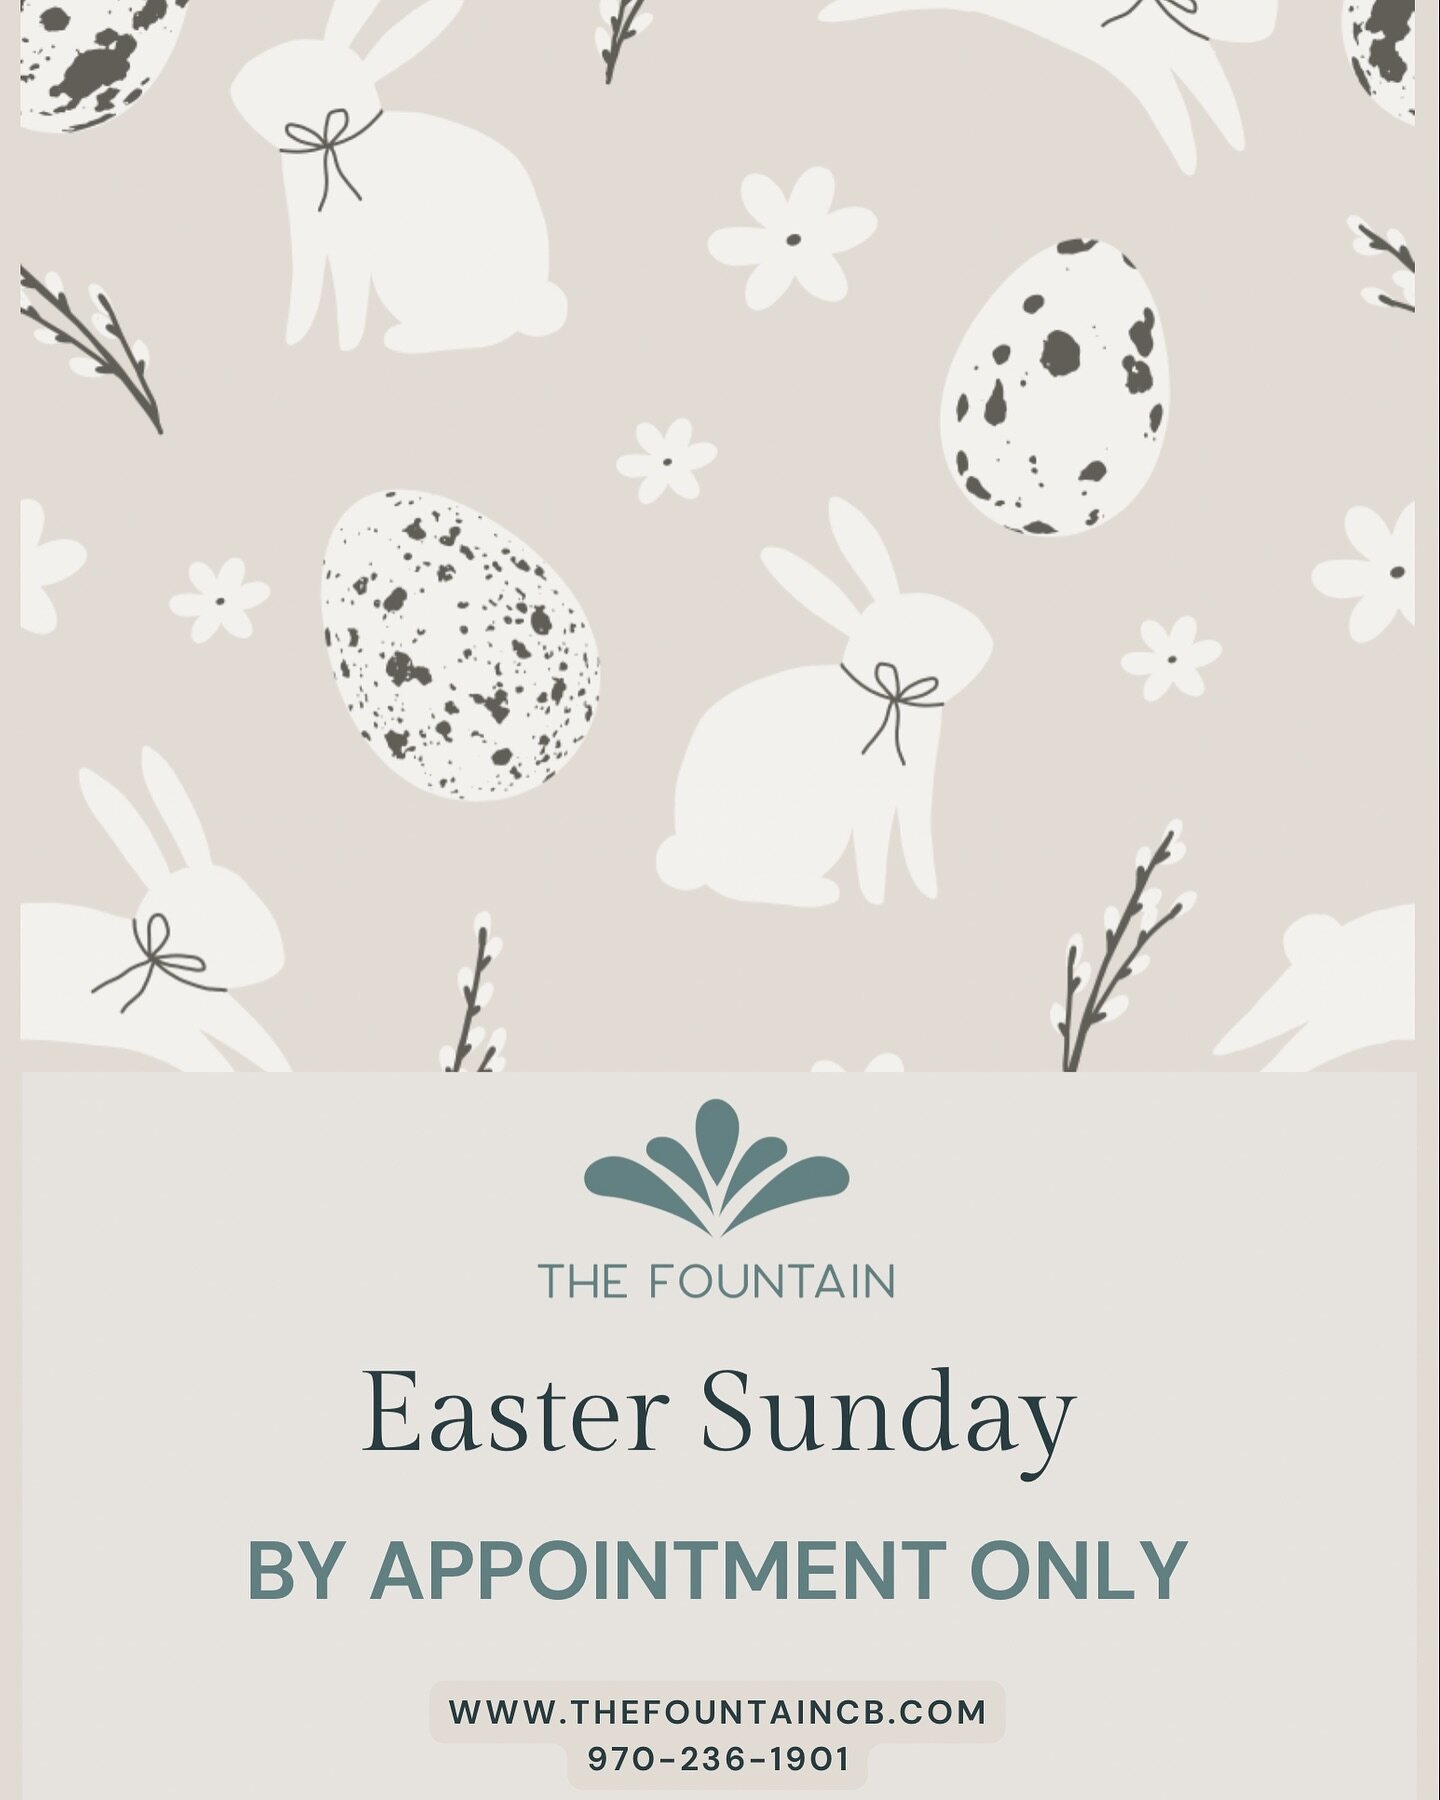 Happy Easter! Today we are providing services by appointment only, enjoy your holiday! 🐰🐣💐

#ivtherapy #crestedbutte #colorado #wellness #easter #hydration #iv